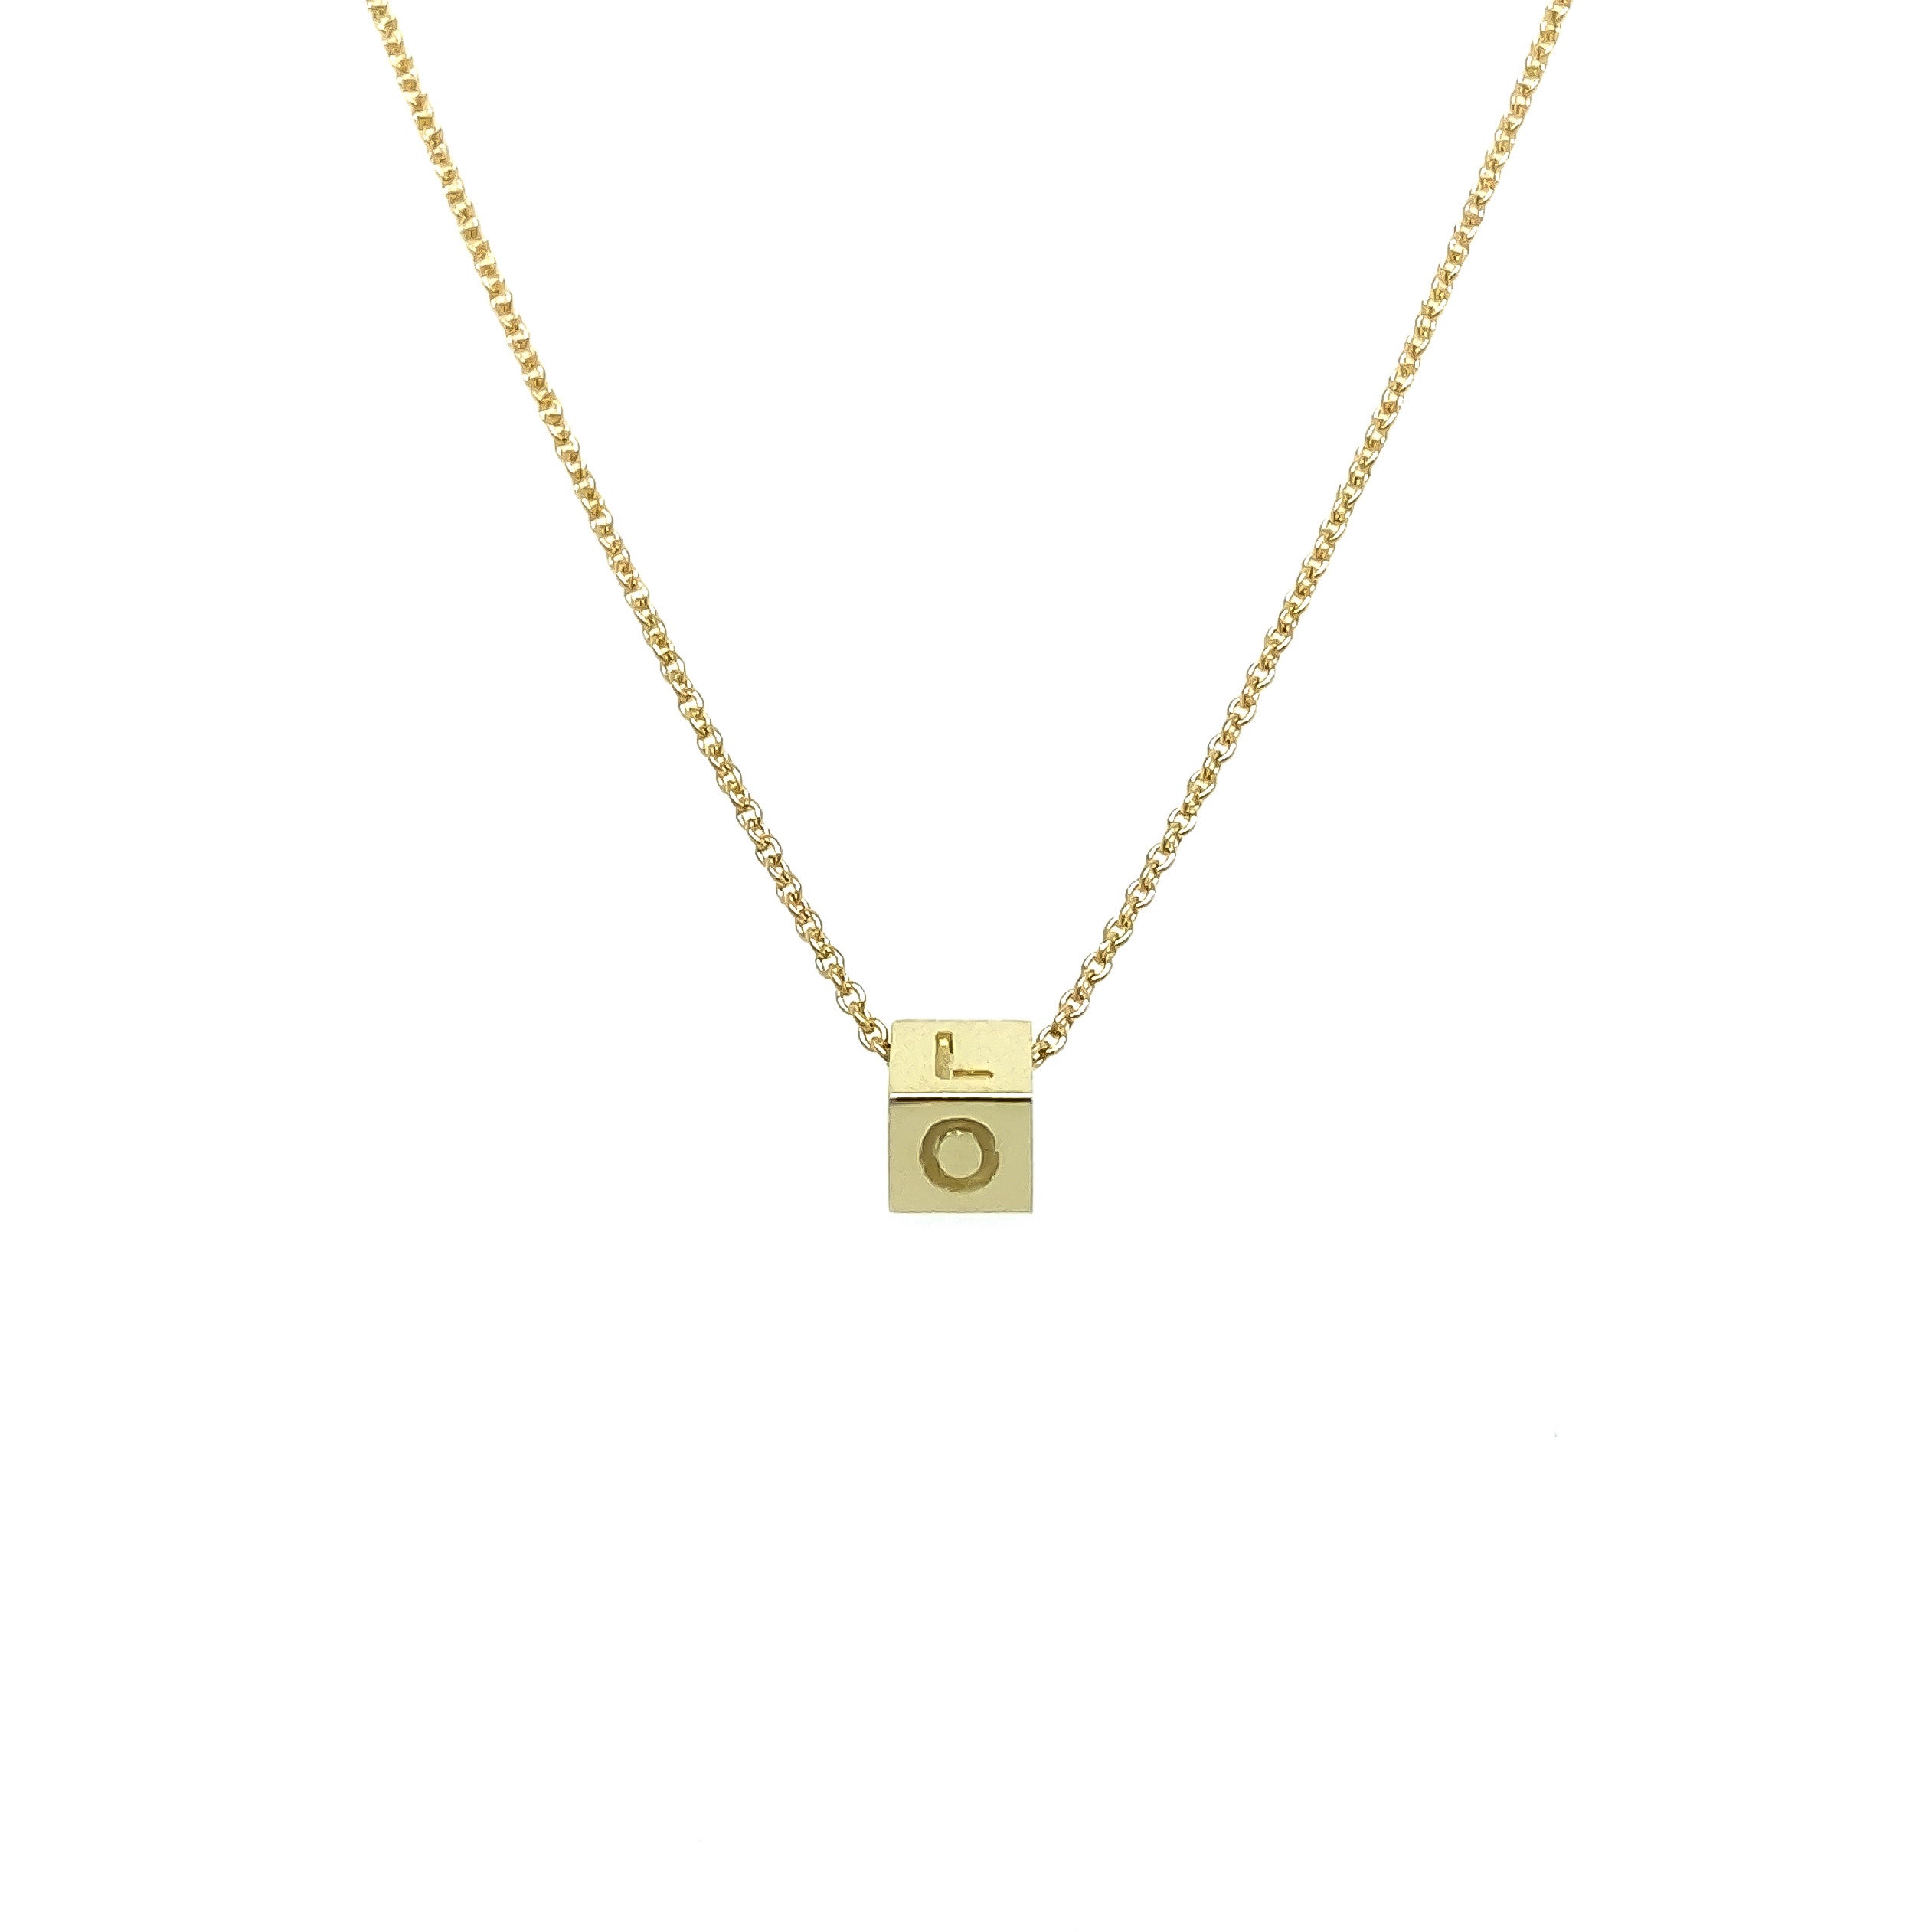 Square Necklace 1 Square with 4 different engravings